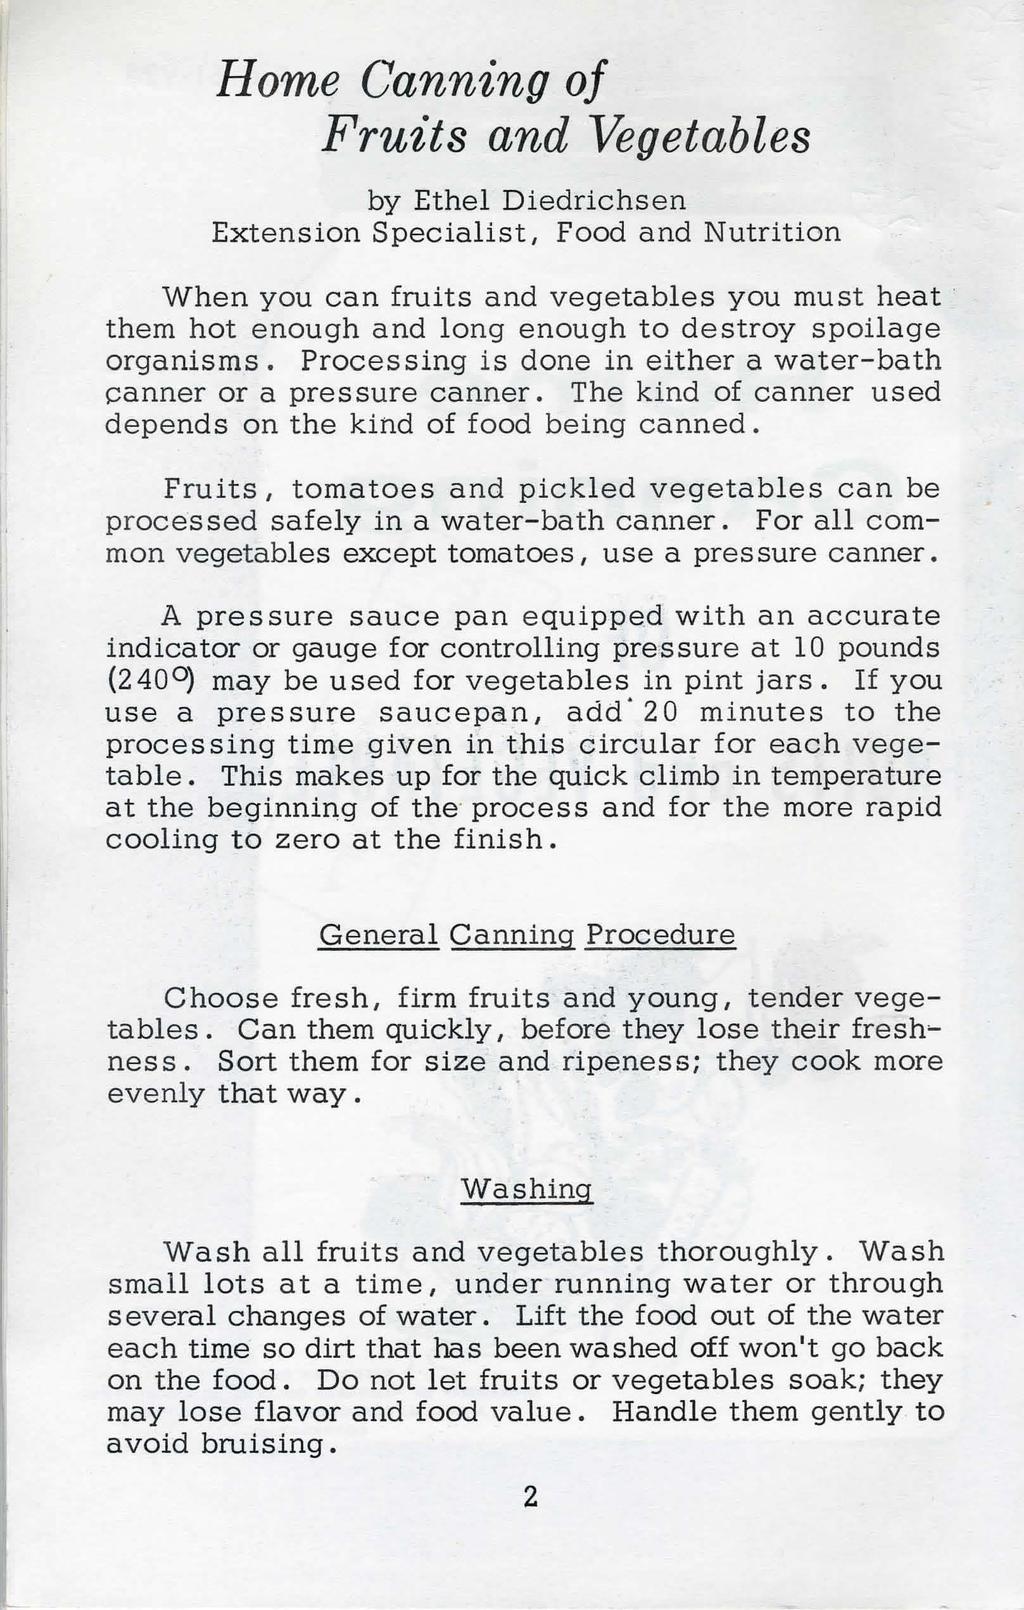 Home Canning of Fruits and Vegetables by Ethel Diedrichsen Extension Specialist, Food and Nutrition When you can fruits and vegetables you must heat them hot enough and long enough to destroy